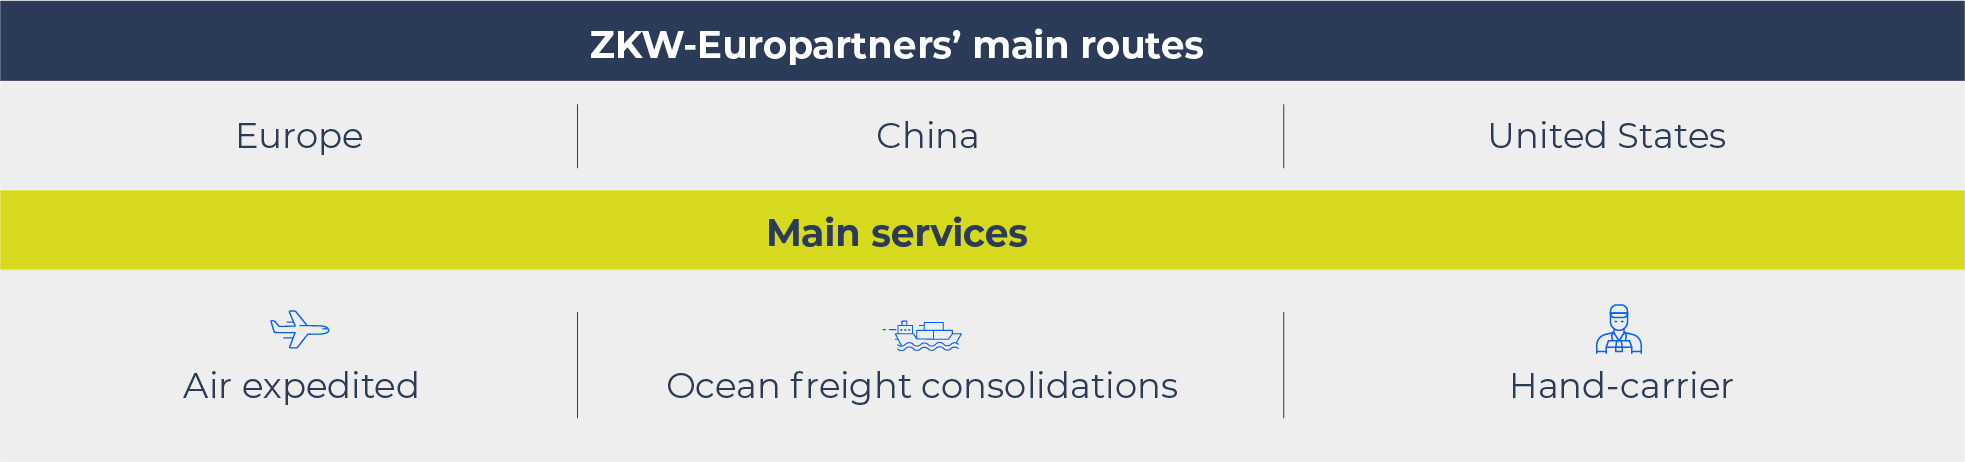 The main routes Europartners handles as cargo Carrier for ZKW are Europe, China and United States. The main services provided are air Expedited, ocean freight consolidations and hand carry.